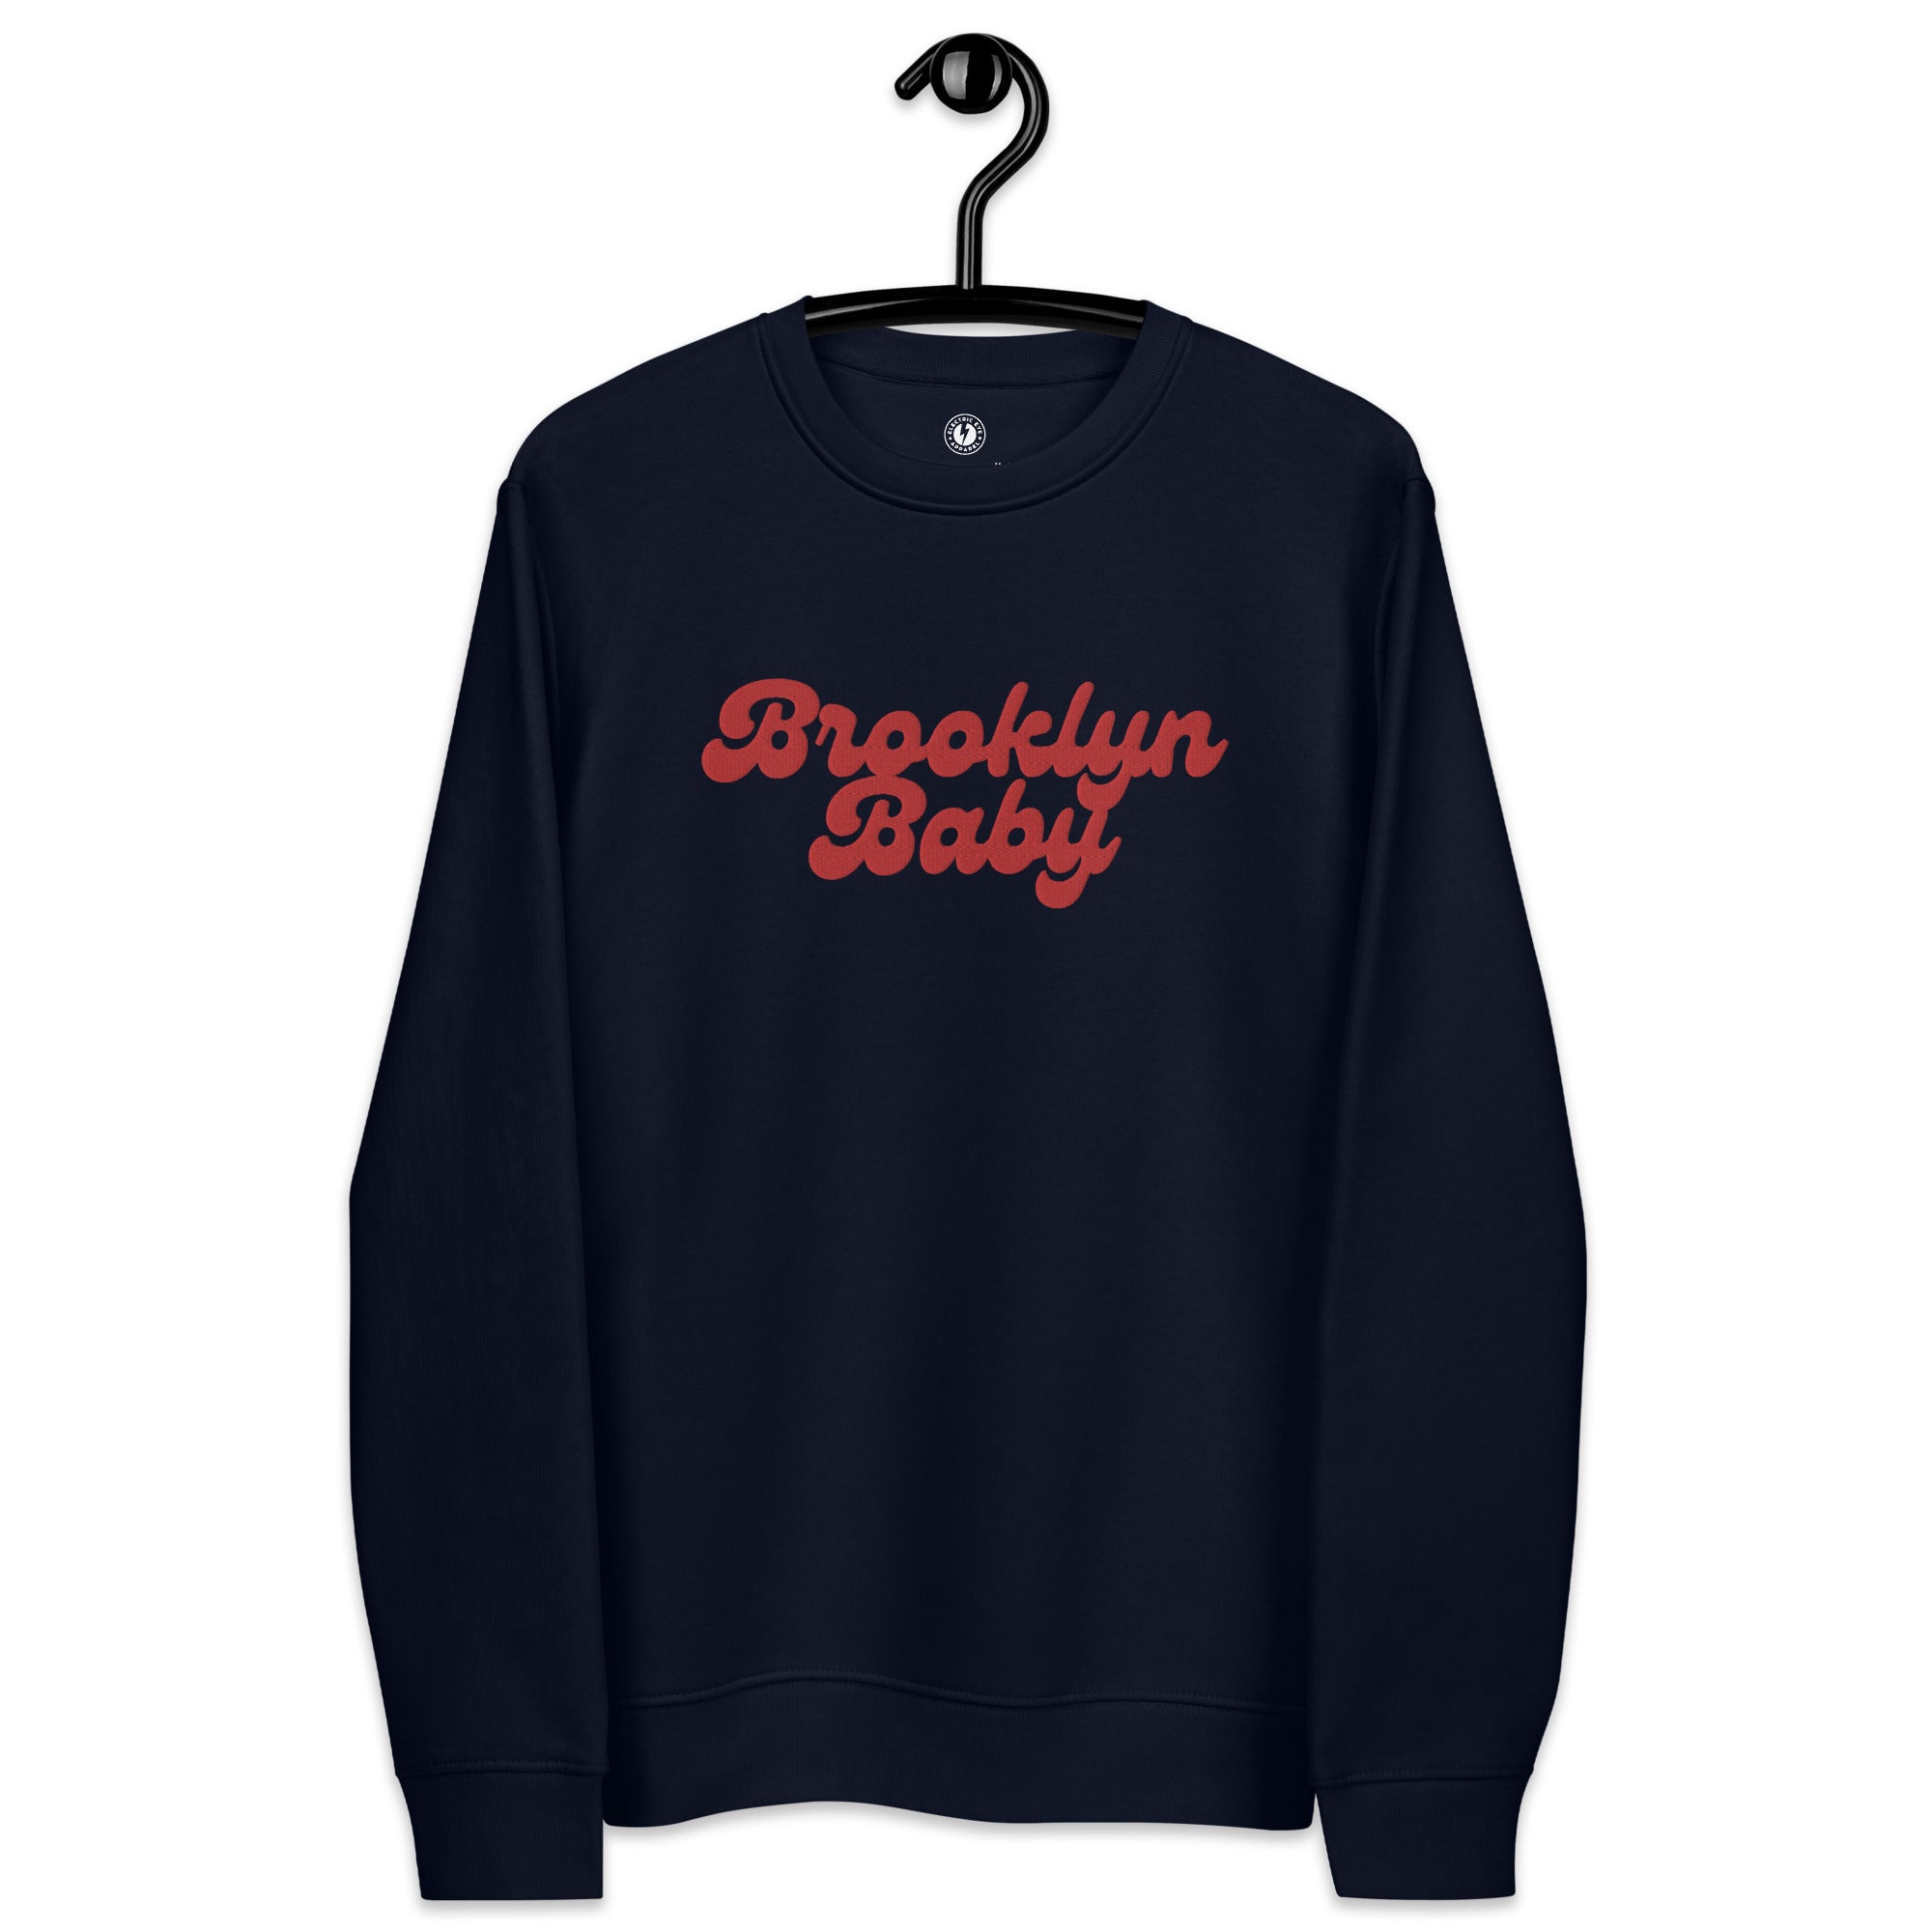 Brooklyn Baby - 70's Style Premium Embroidered Unisex organic sweatshirt - Red Embroidery